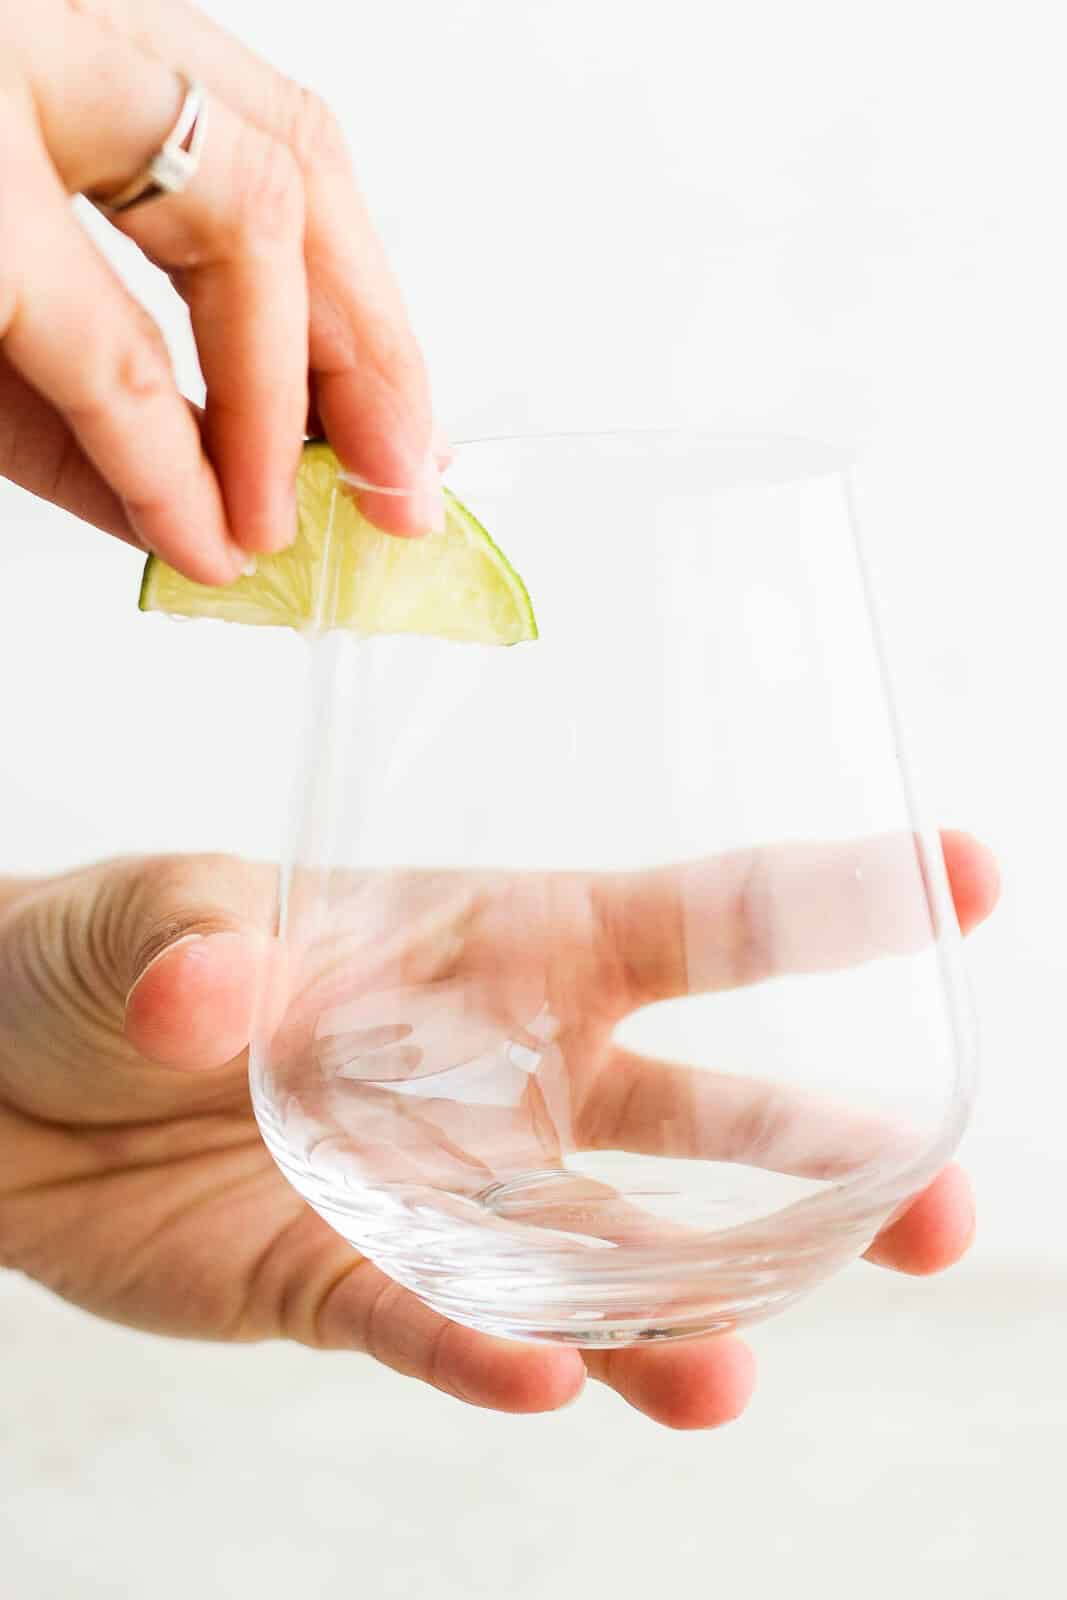 The rim of a glass being rubbed with a lime wedge.